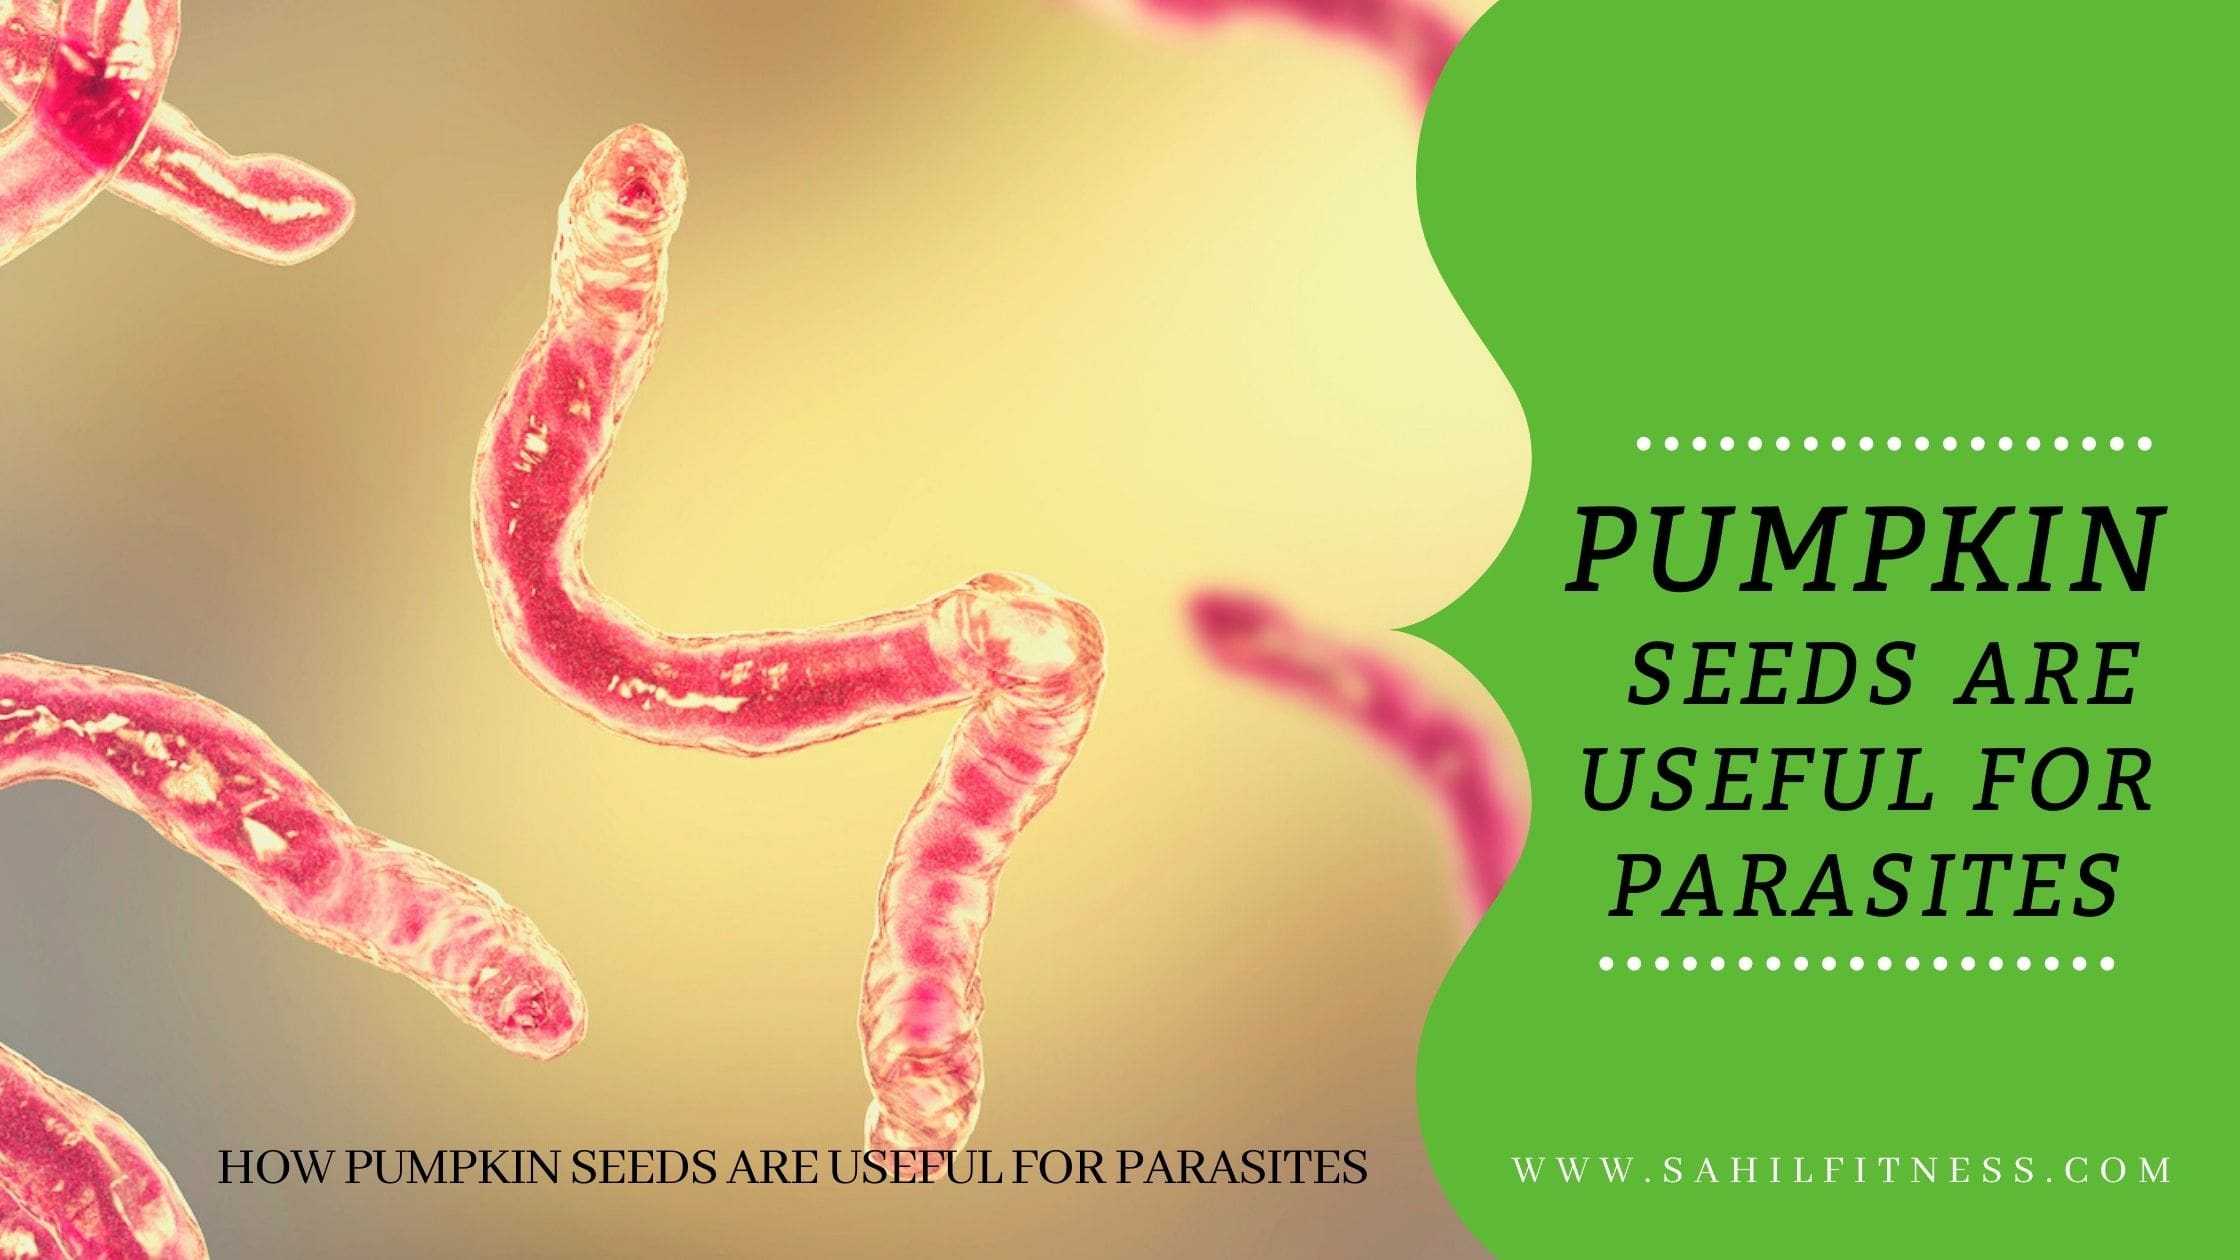 How to Take Pumpkin Seeds Against Parasites